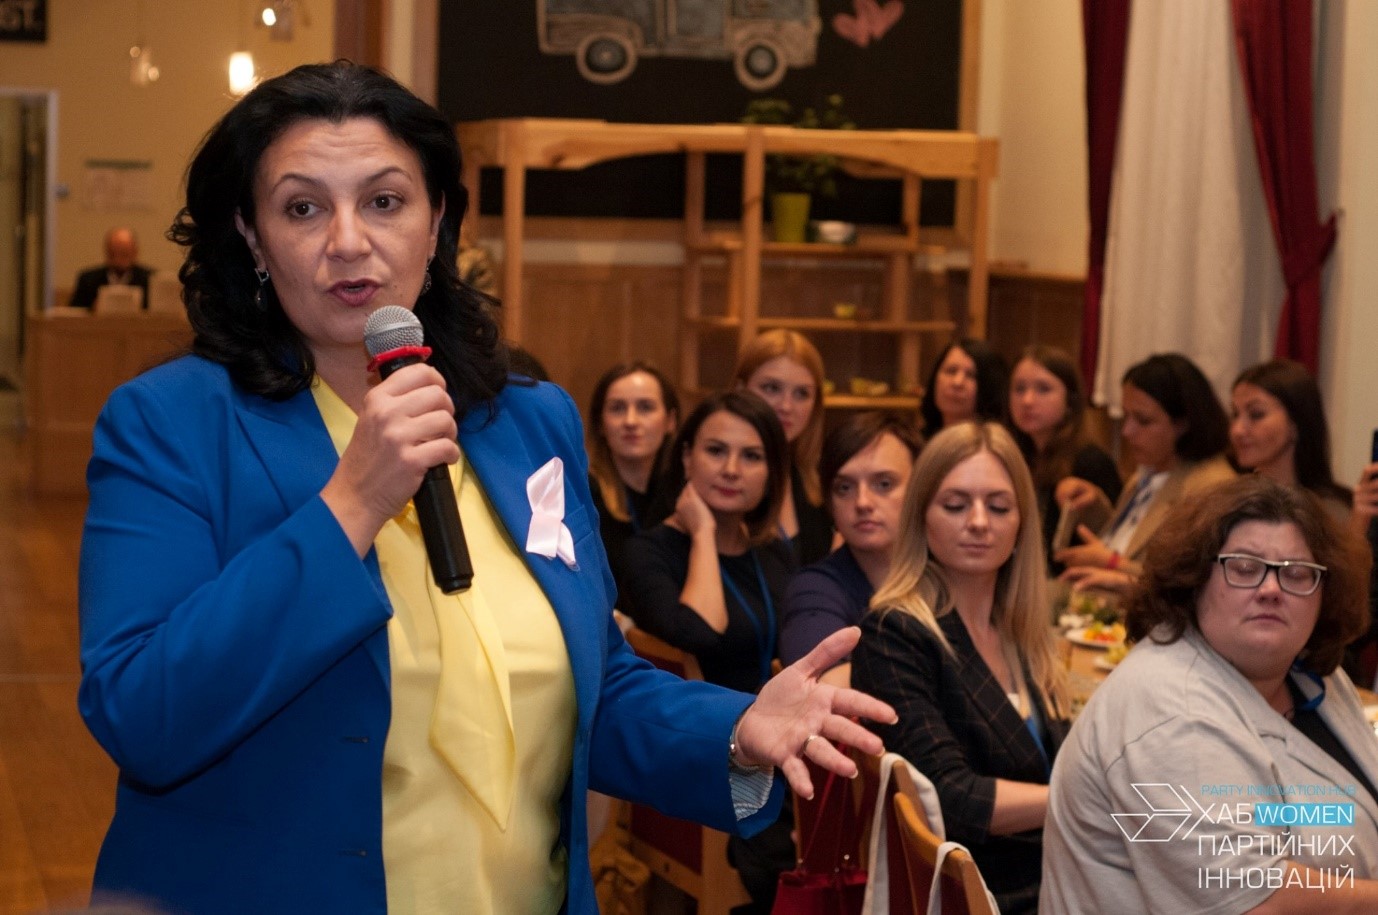 Ivanna Klympush-Tsintsadze, former vice prime minister for European and Euro-Atlantic integration, speaking with participants of the Party Innovations Hub Women, held in October 2019. Photo credit: International IDEA